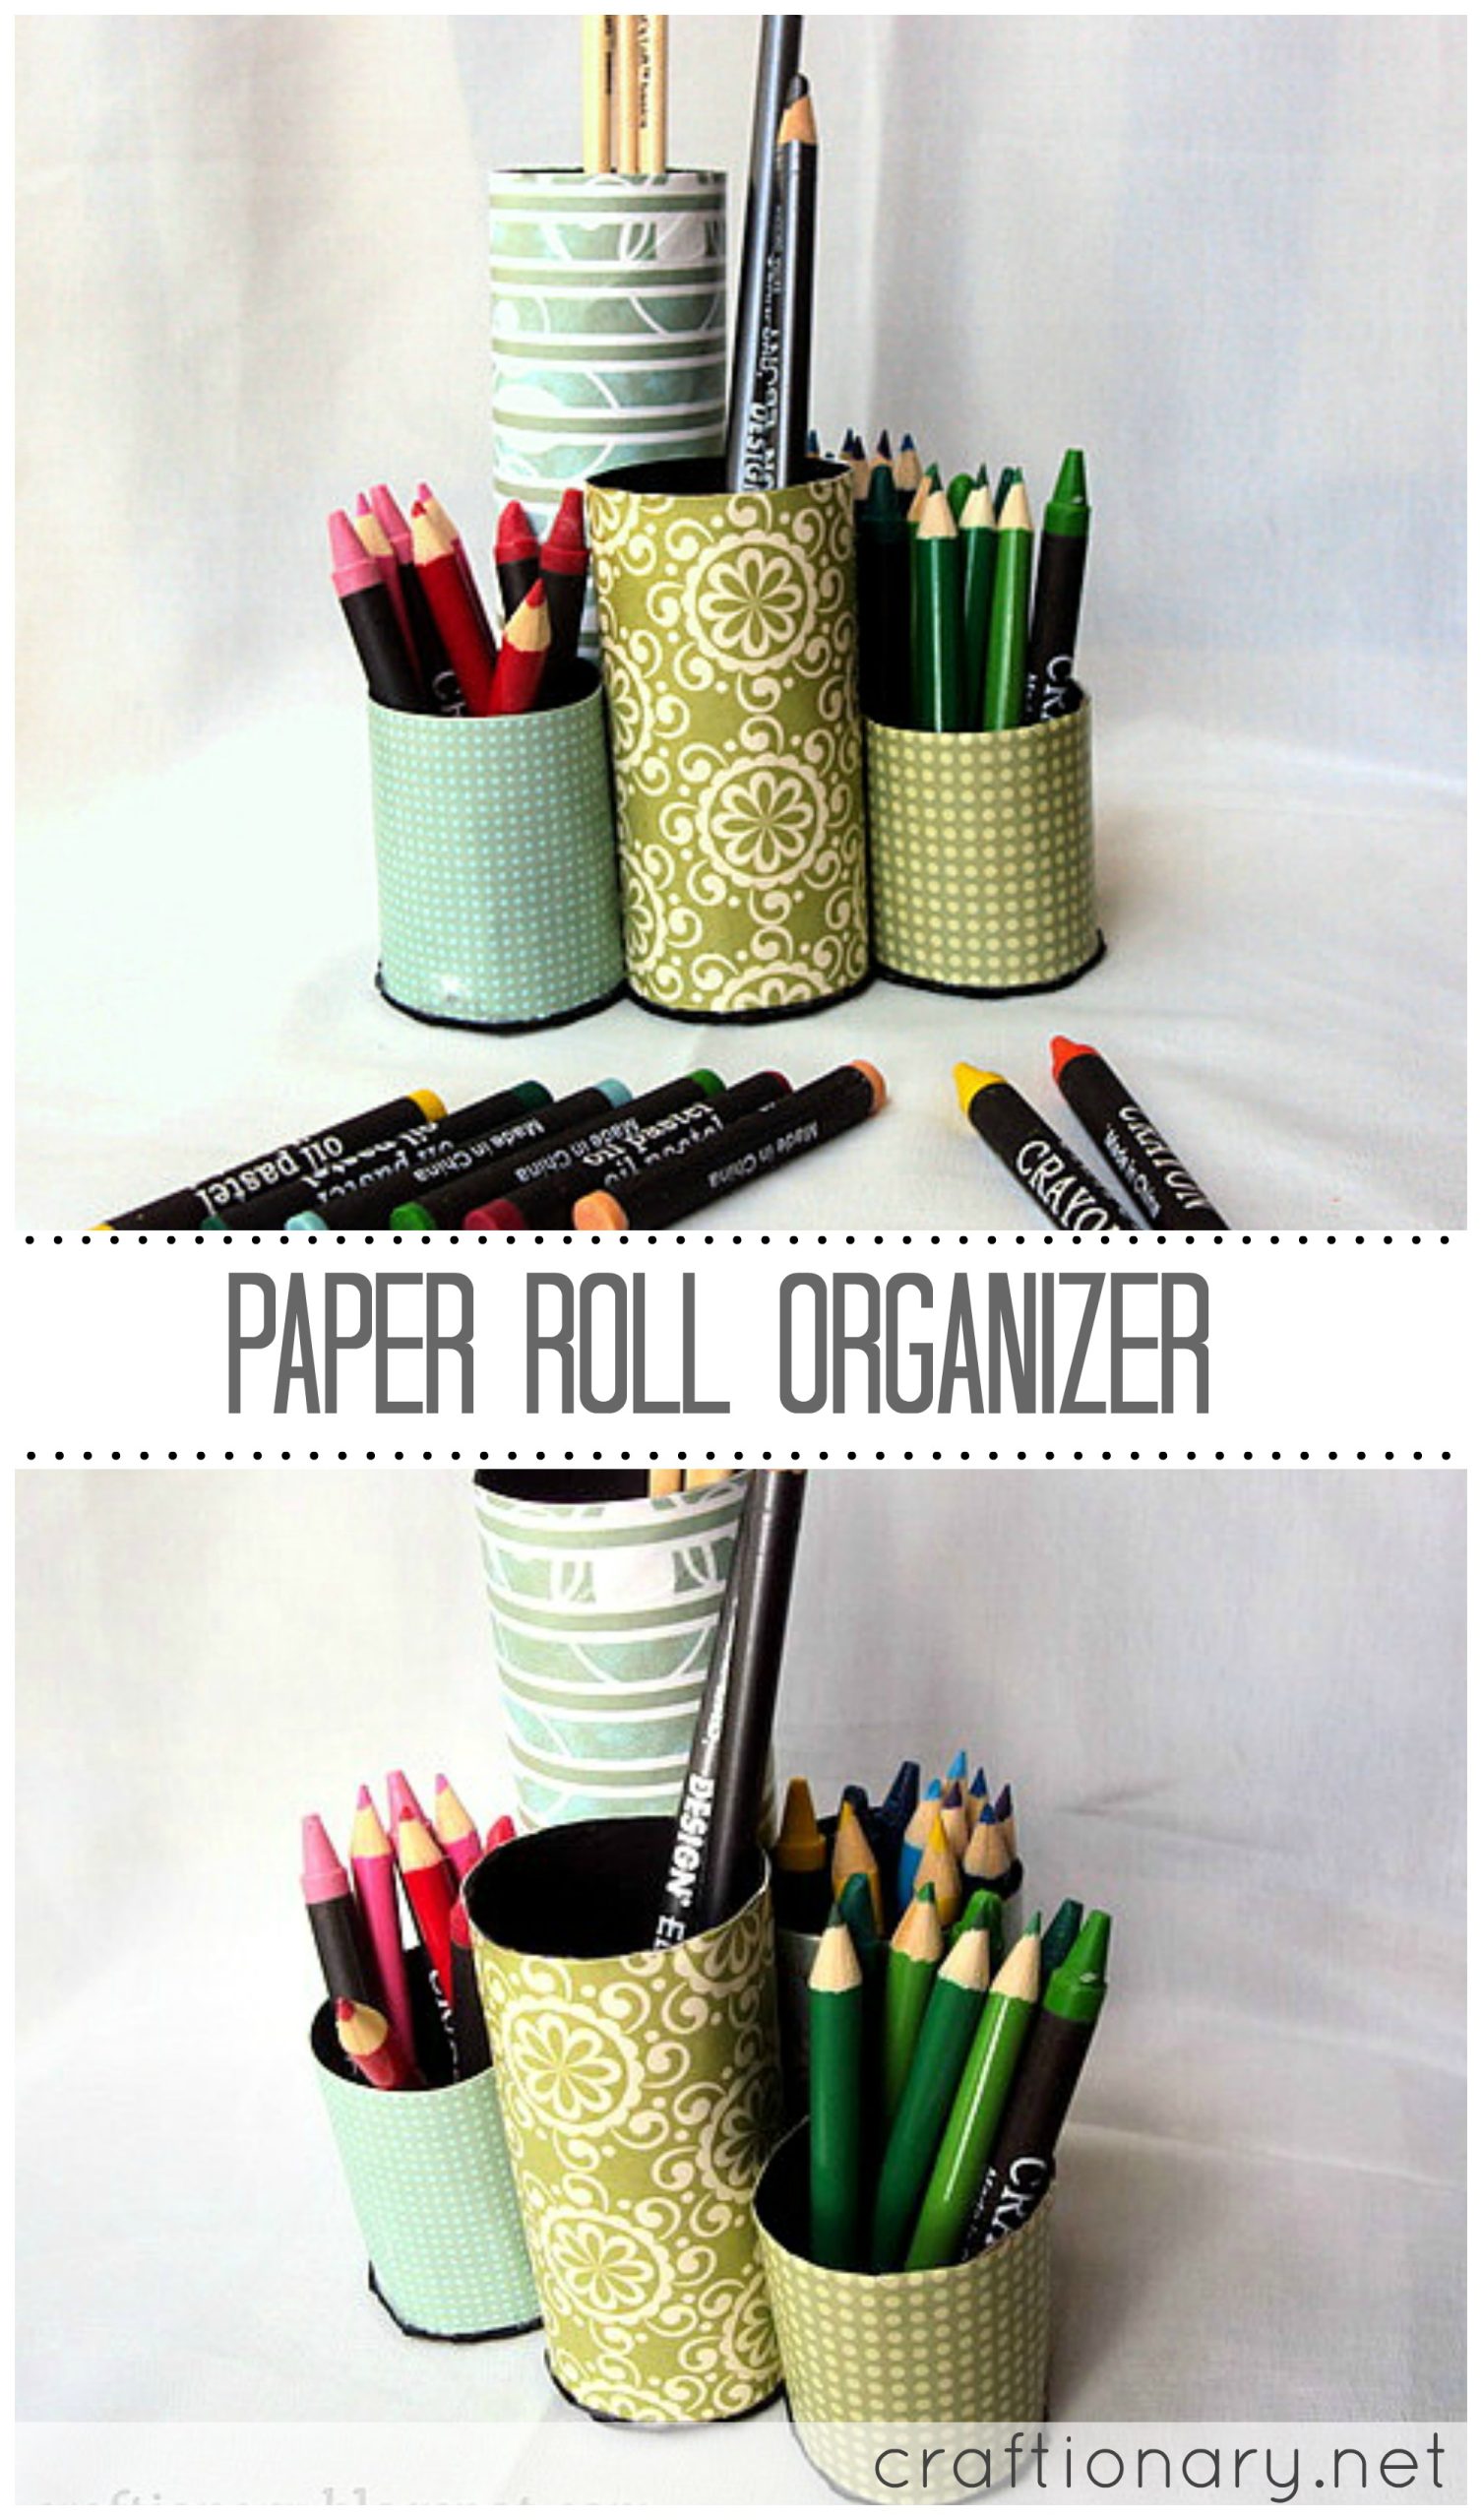 https://www.craftionary.net/wp-content/uploads/2011/08/recycle-paper-roll-scaled.jpg